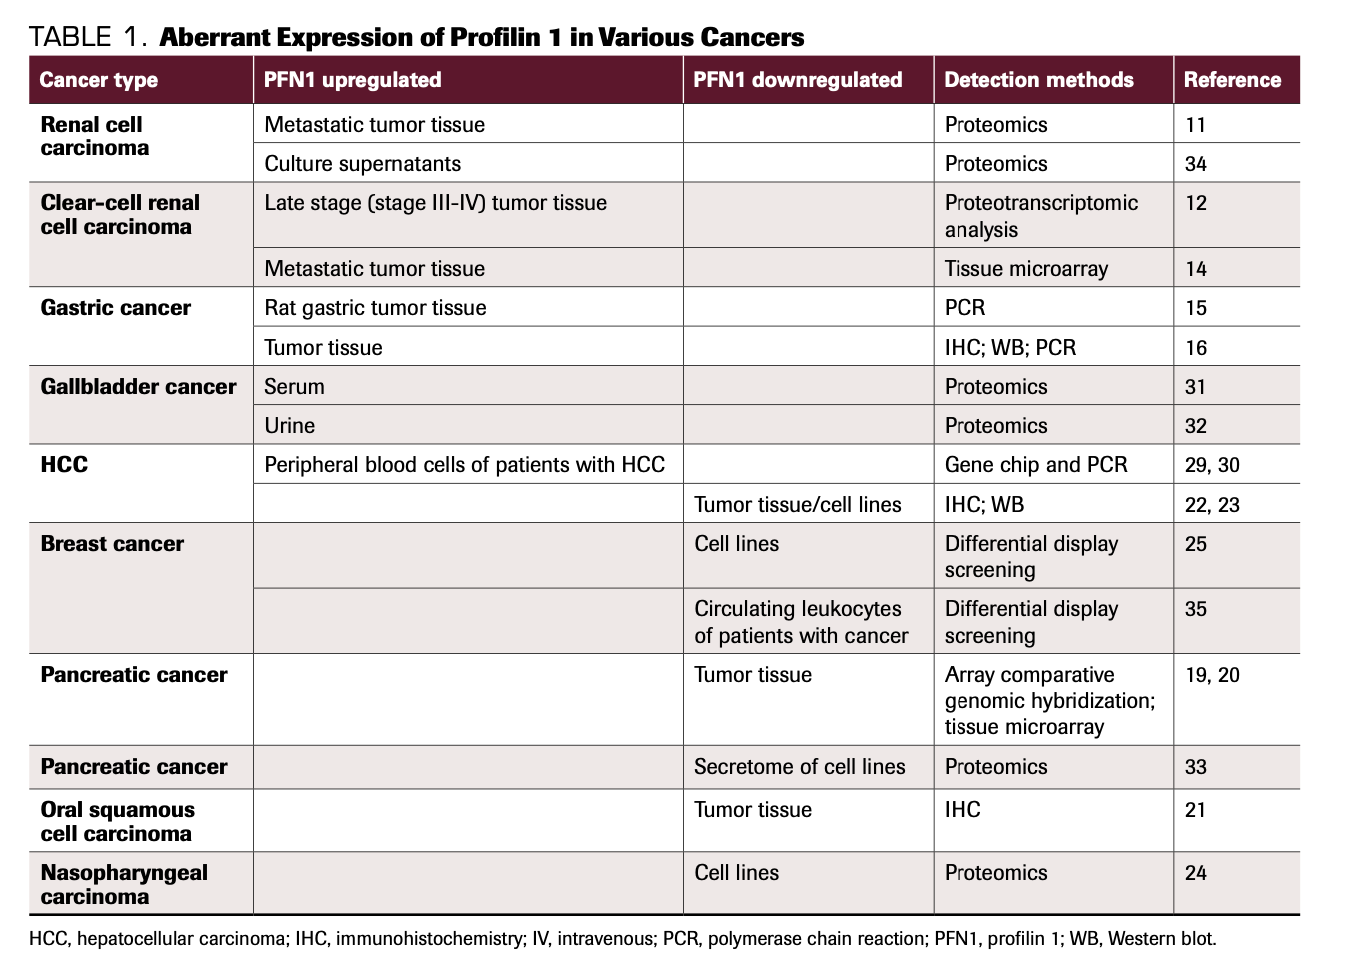 TABLE 1. Aberrant Expression of Profilin 1 in Various Cancers